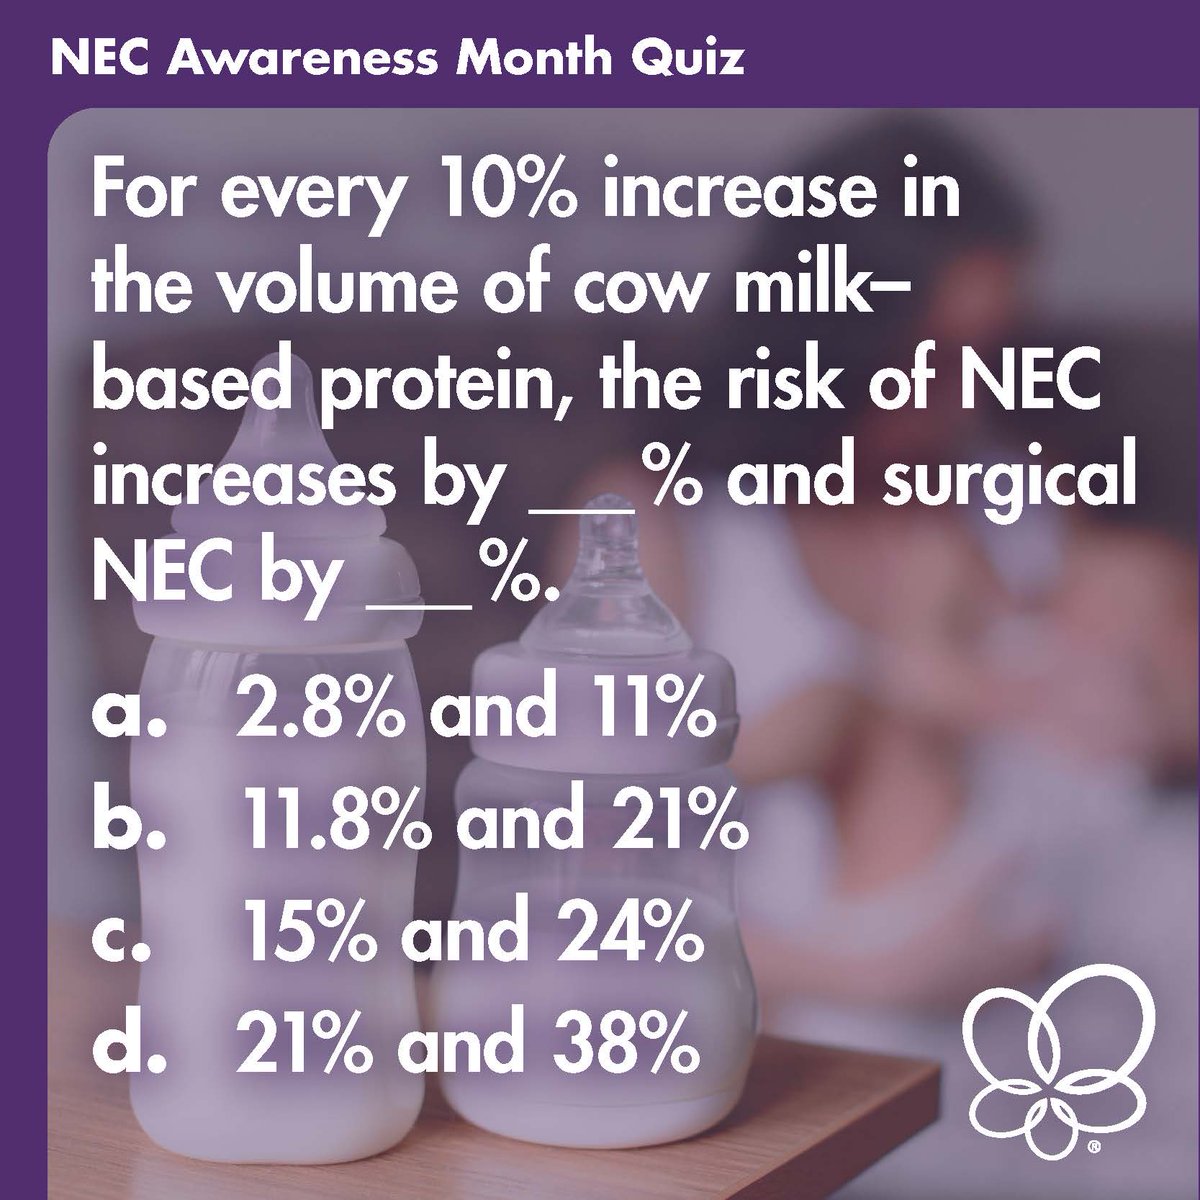 A combined analysis of two randomized clinical studies demonstrates a dose–response relationship that negatively affects patient outcomes when fed cow milk-based protein. Need a hint to answer this NEC quiz? Check out our Overcoming Complications page: hubs.ly/Q02wwQvZ0